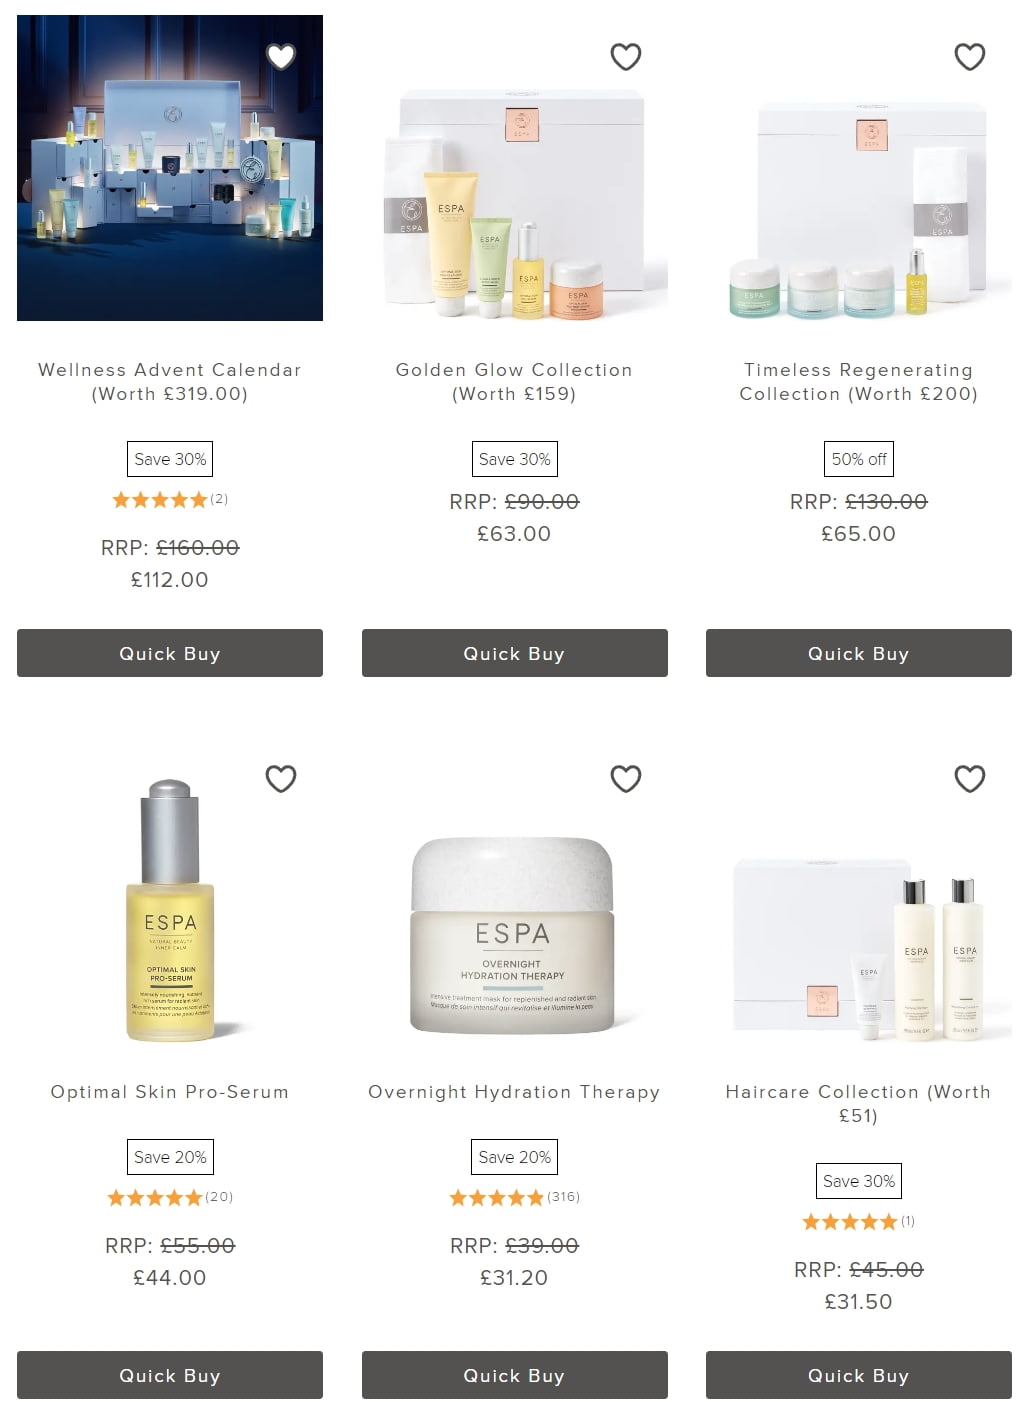 Winter Sale at ESPA: Up to 50% off selected